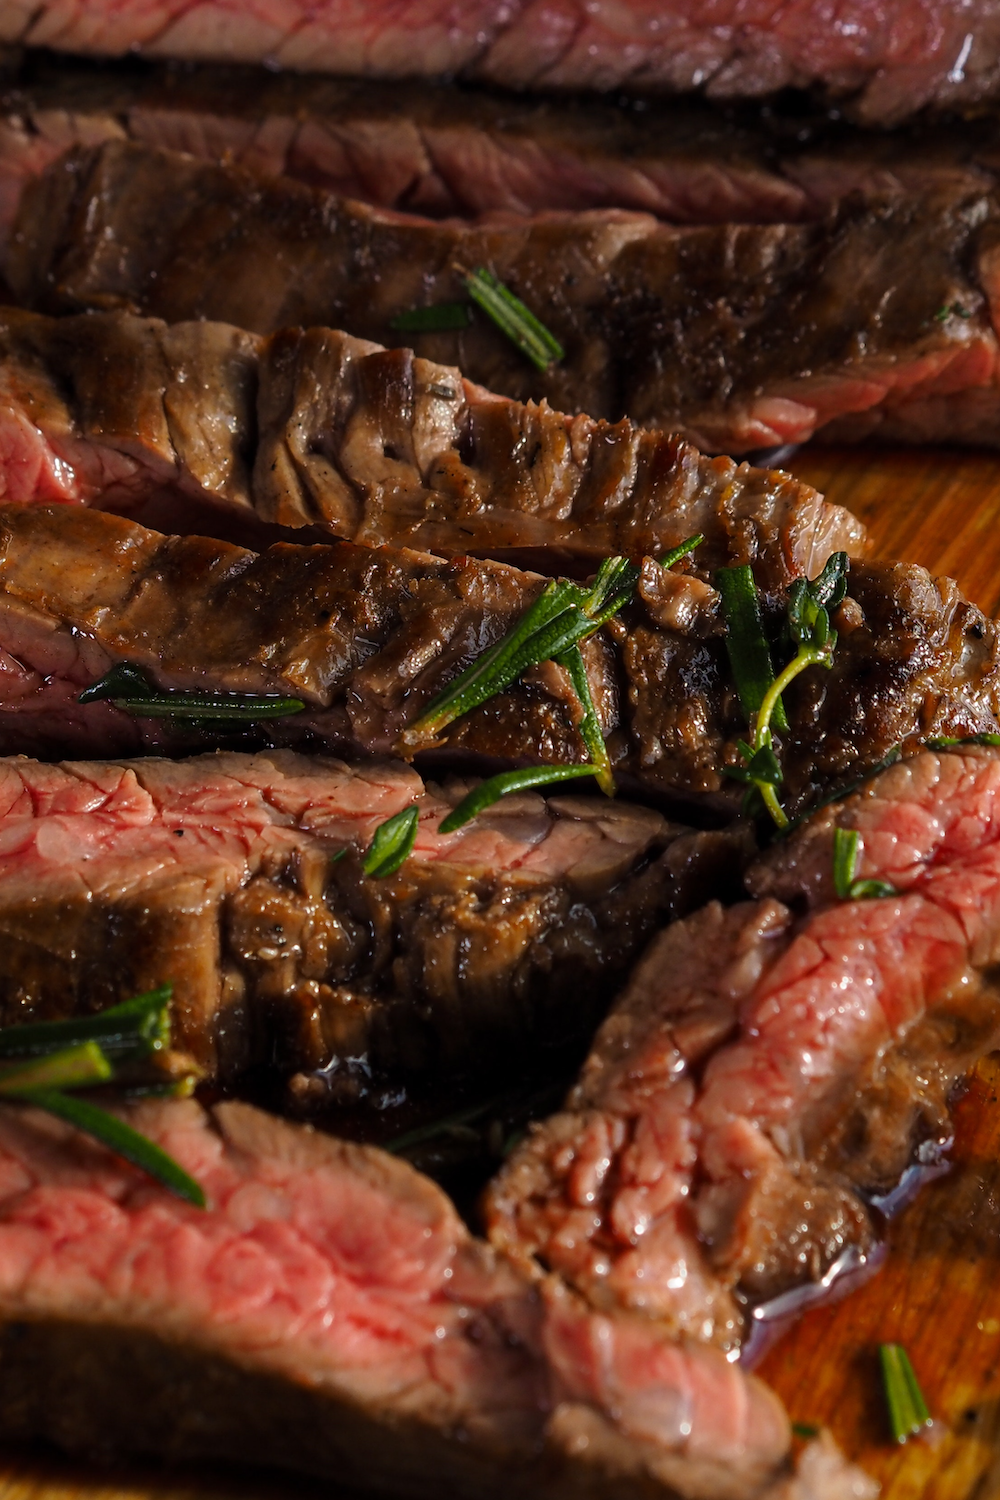 recipes for New York strip steak image showing juicy medium cooked slices of New York strip steak sprinkled with rosemary on a wooden cutting board